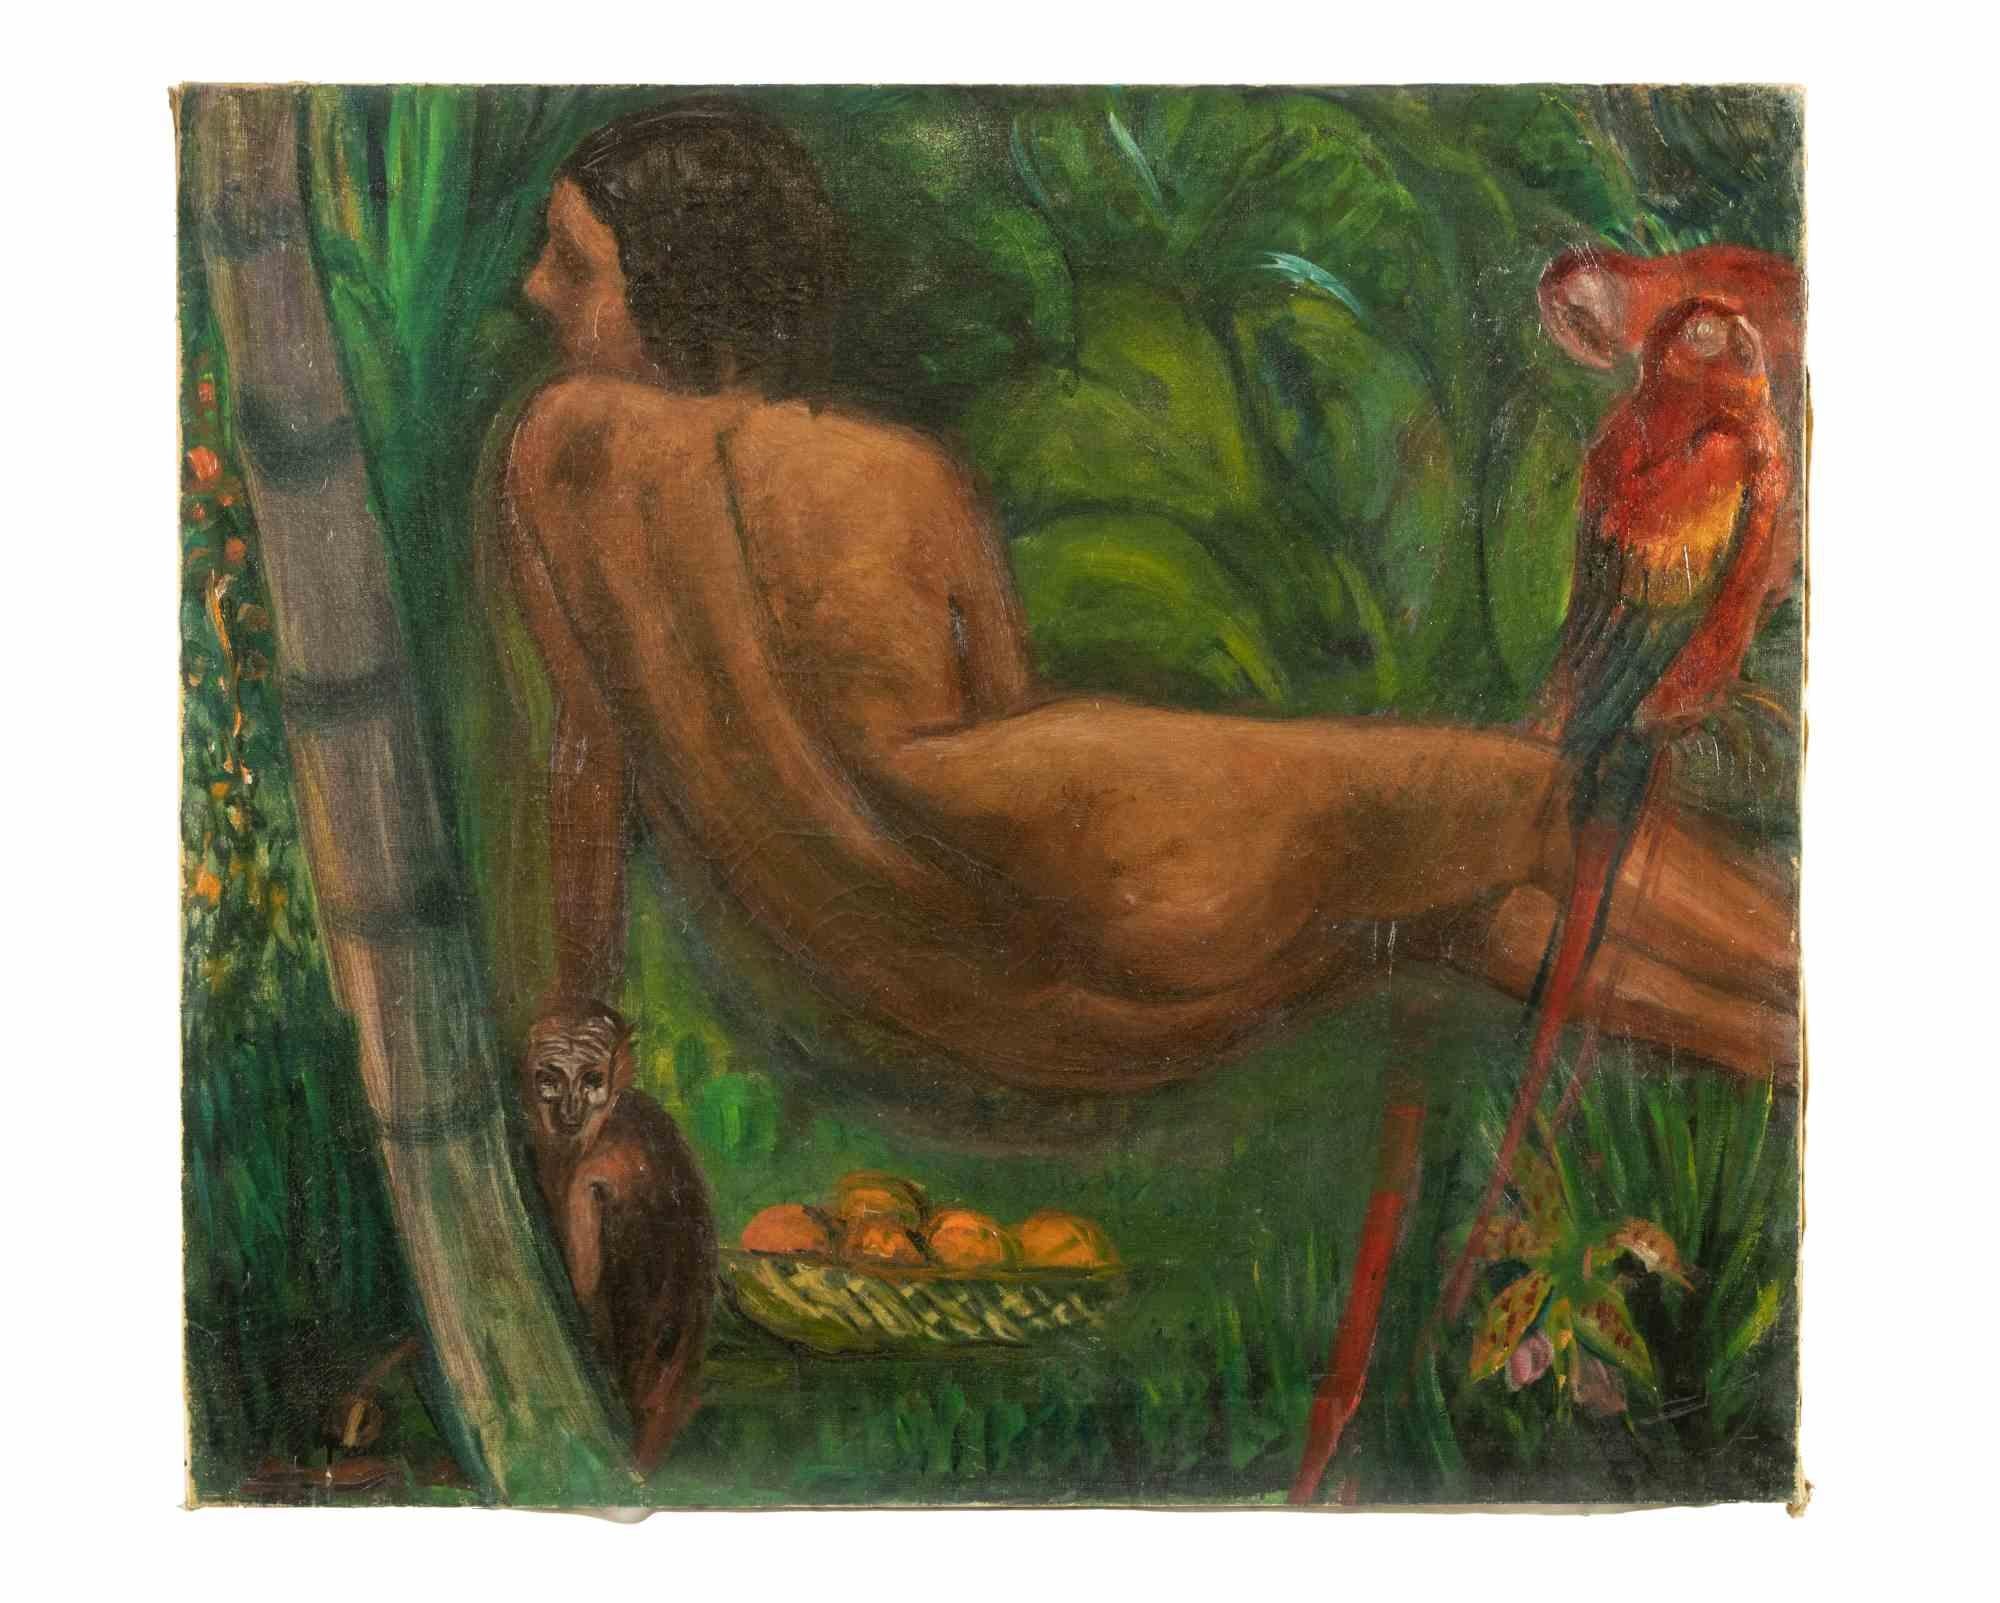 Antonio Feltrinelli  Nude Painting - Nude with Tropical Animals - Oil Painting on Canvas by A. Feltrinelli  - 1920s